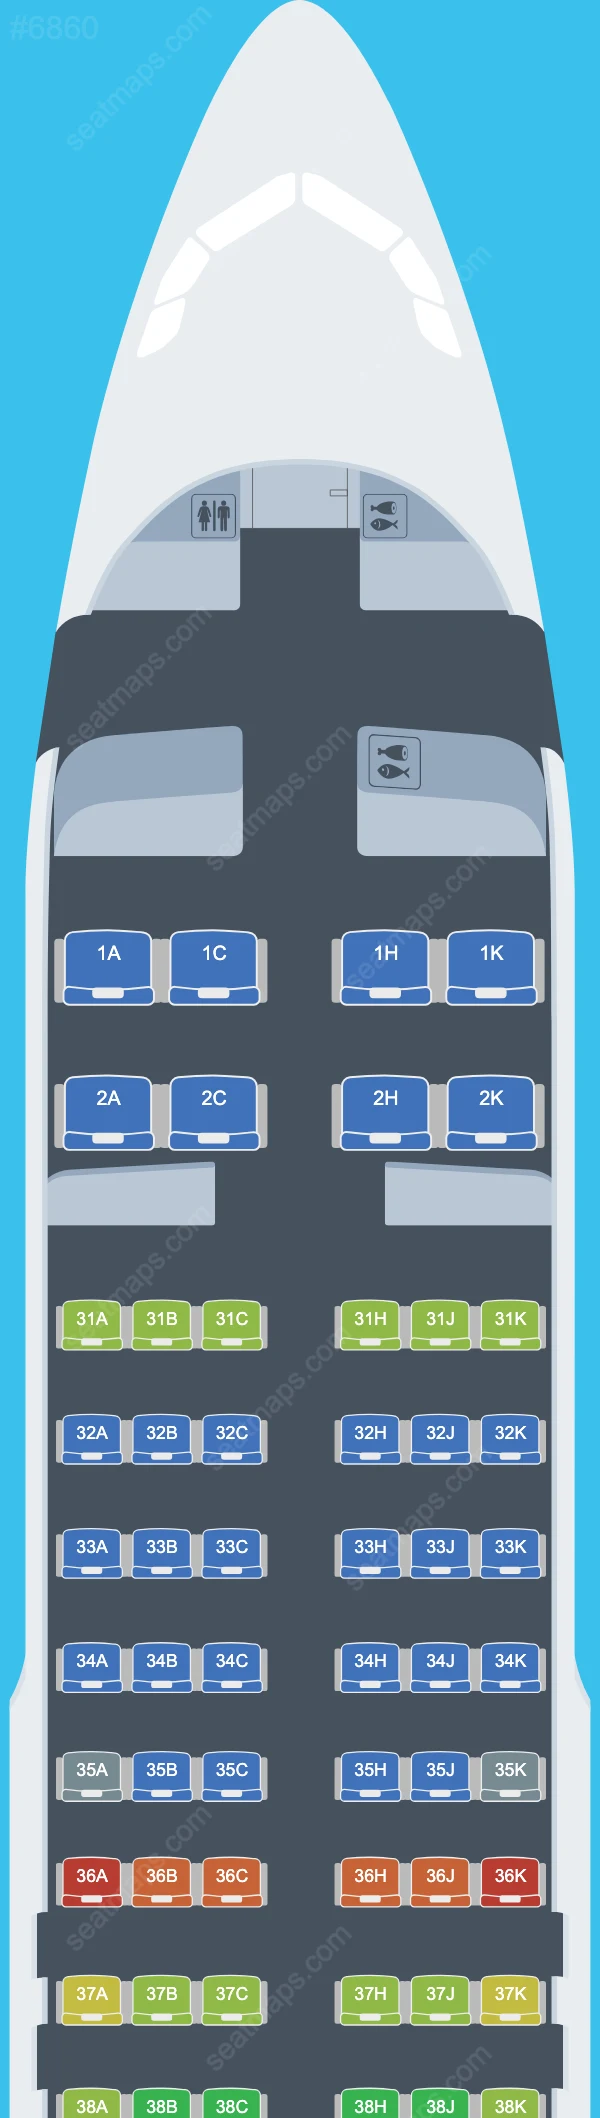 Chongqing Airlines Airbus A320-200 seatmap preview